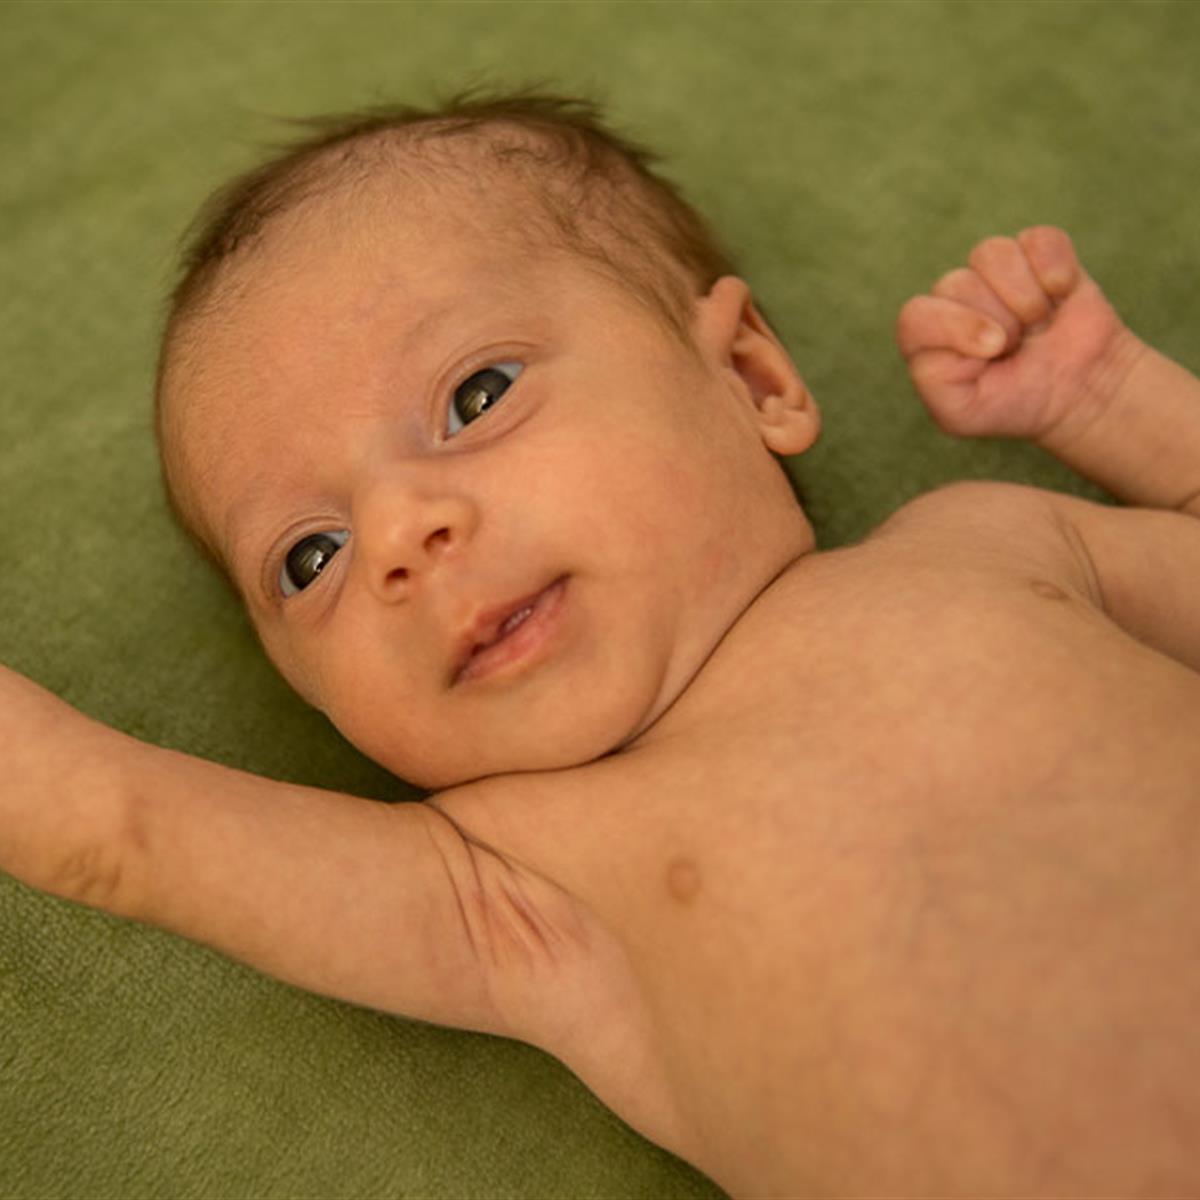 Study: Newborn Babies Have Innate Skills to Pick Out Individual Words